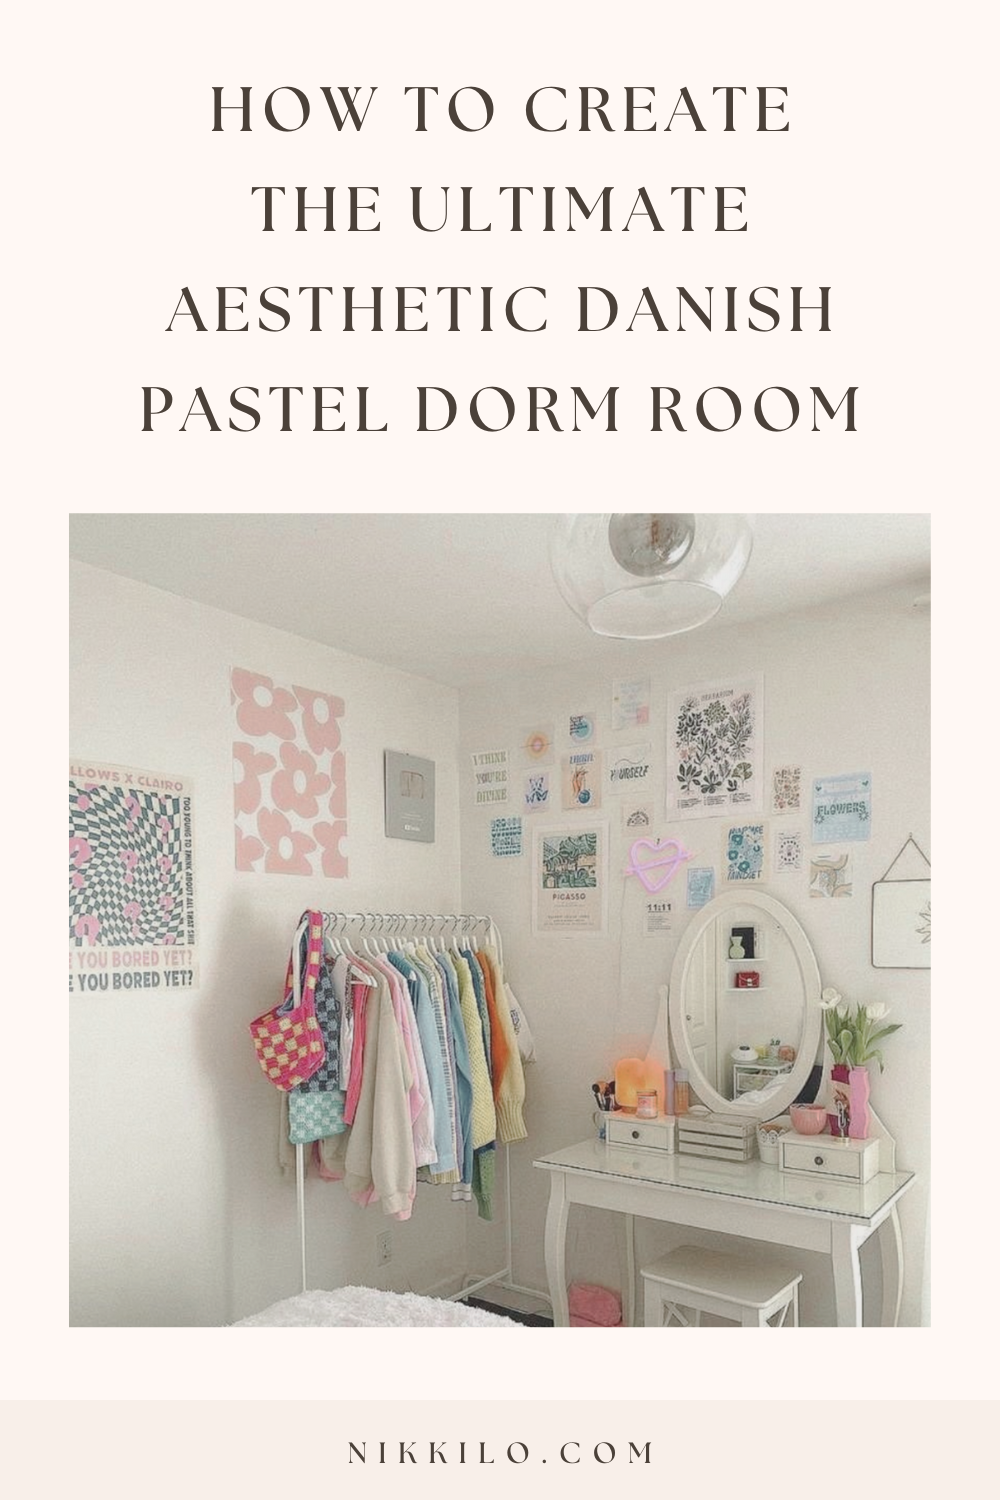 How To Decorate A Danish Pastel Room And Create An Aesthetic Space You'll  Adore! — Nikki Lo